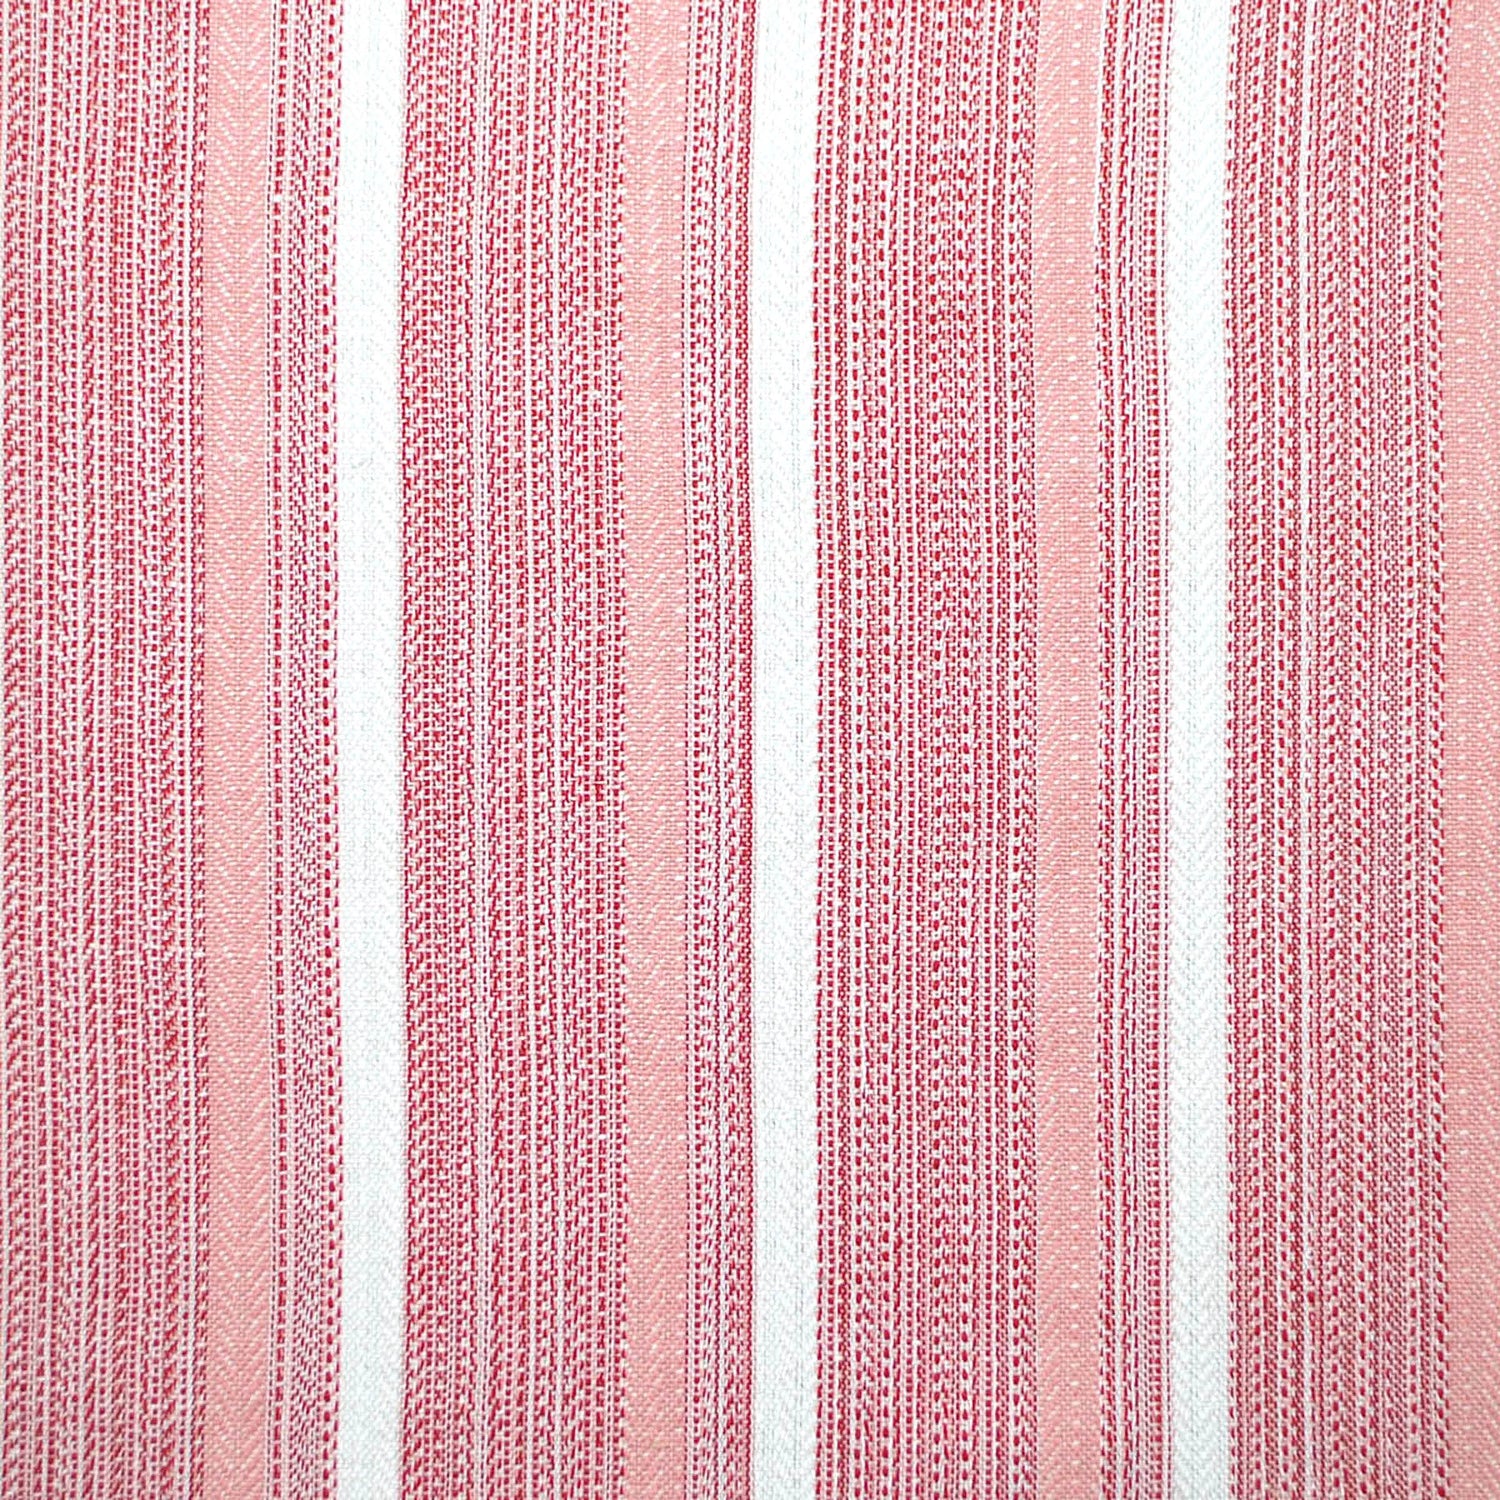 Winfield Hall fabric in coral color - pattern number PQ 0001A400 - by Scalamandre in the Old World Weavers collection